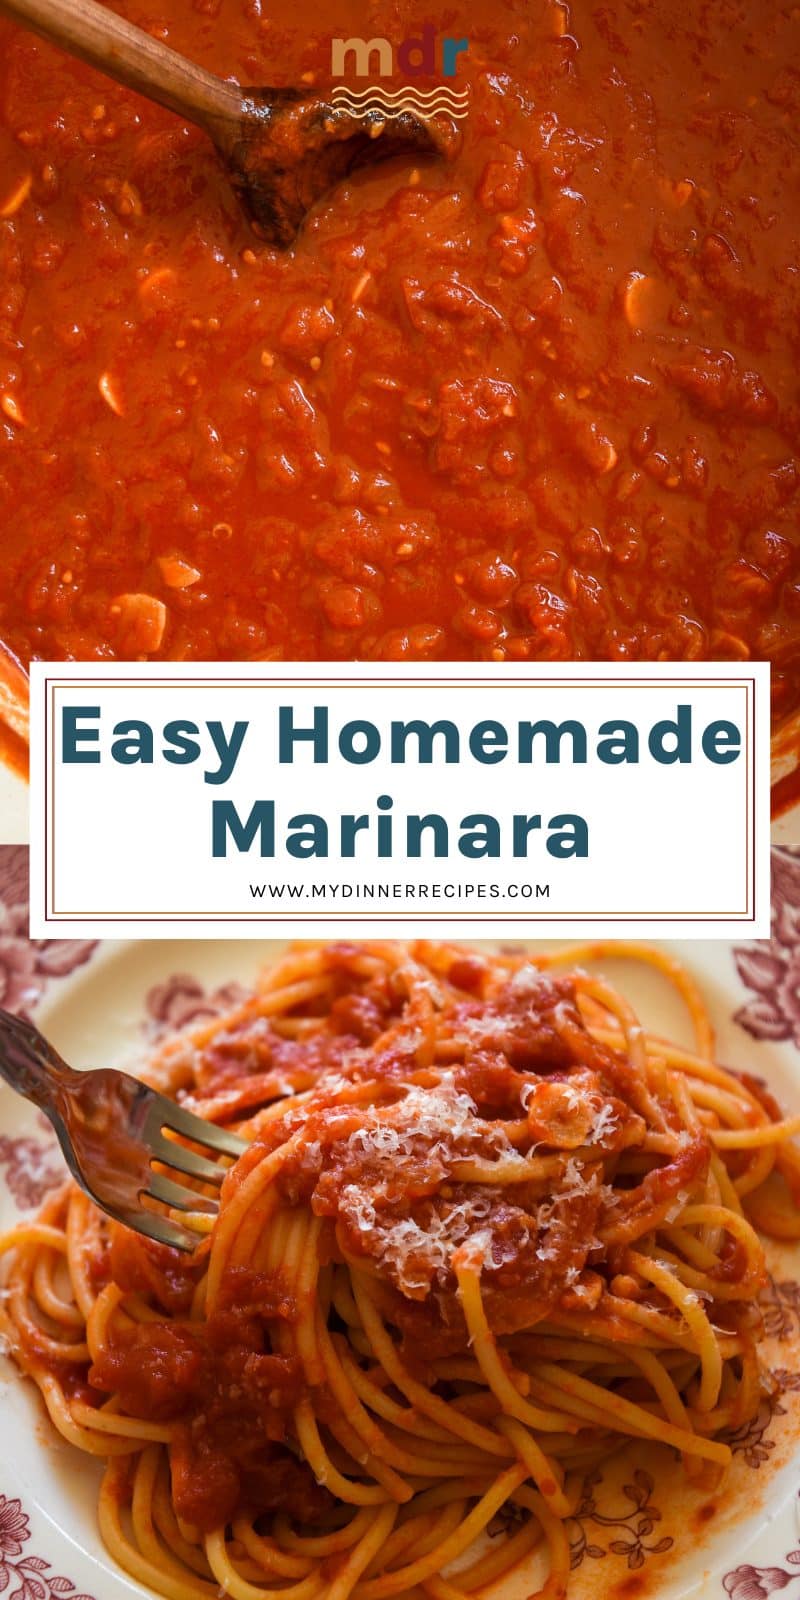 top image: dutch oven filled with easy homemade marinara
bottom image: plate of spaghetti marinara with a fork digging in